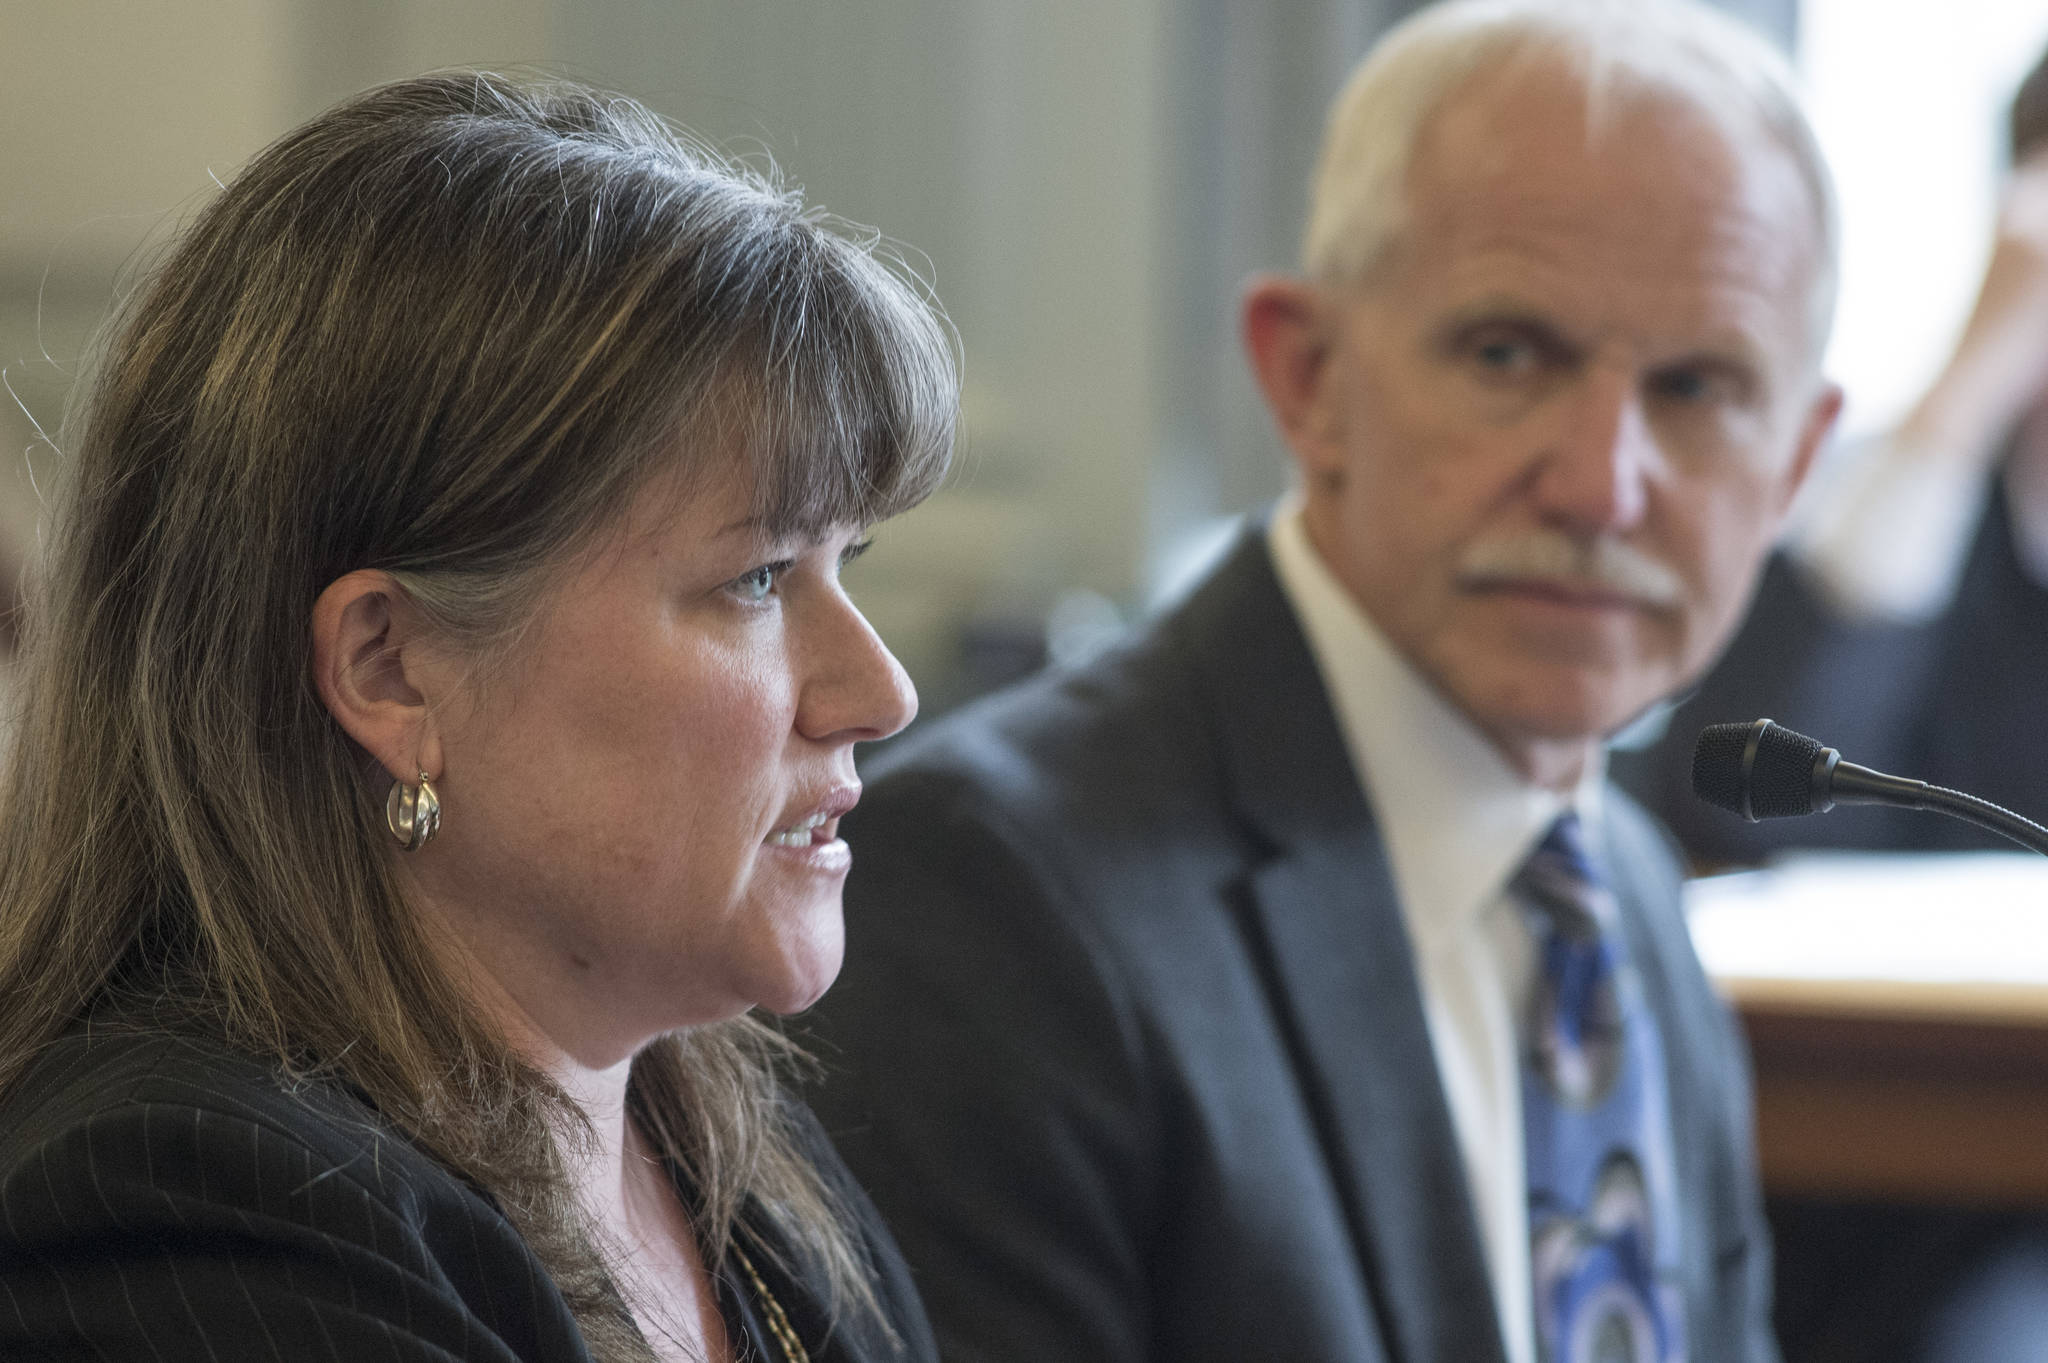 Sara Chambers, Deputy Director of the Division of Corporations, Business and Professional Licensing at the Department of Commerce, Community and Economic Development, left, and Dr. Jay C. Butler, Chief Medical Officer for the Alaska Department of Health and Social Services, speak about an opioids bill in front of the Senate Finance Committee at the Capitol on Tuesday, May 30, 2017. (Michael Penn | Juneau Empire)